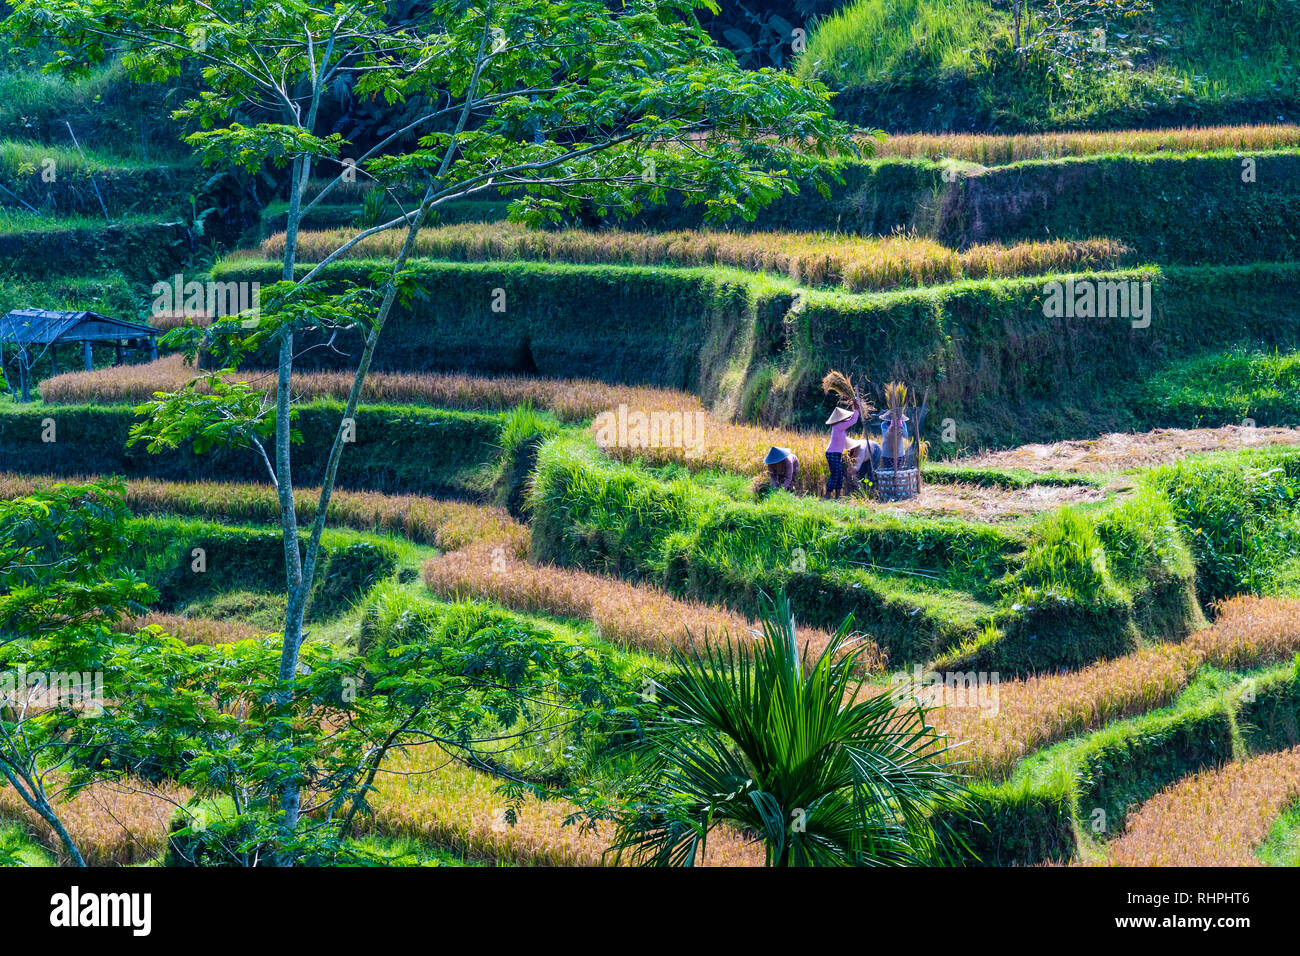 Rice farmers working in a rice paddy in Ubud Indonesia Stock Photo